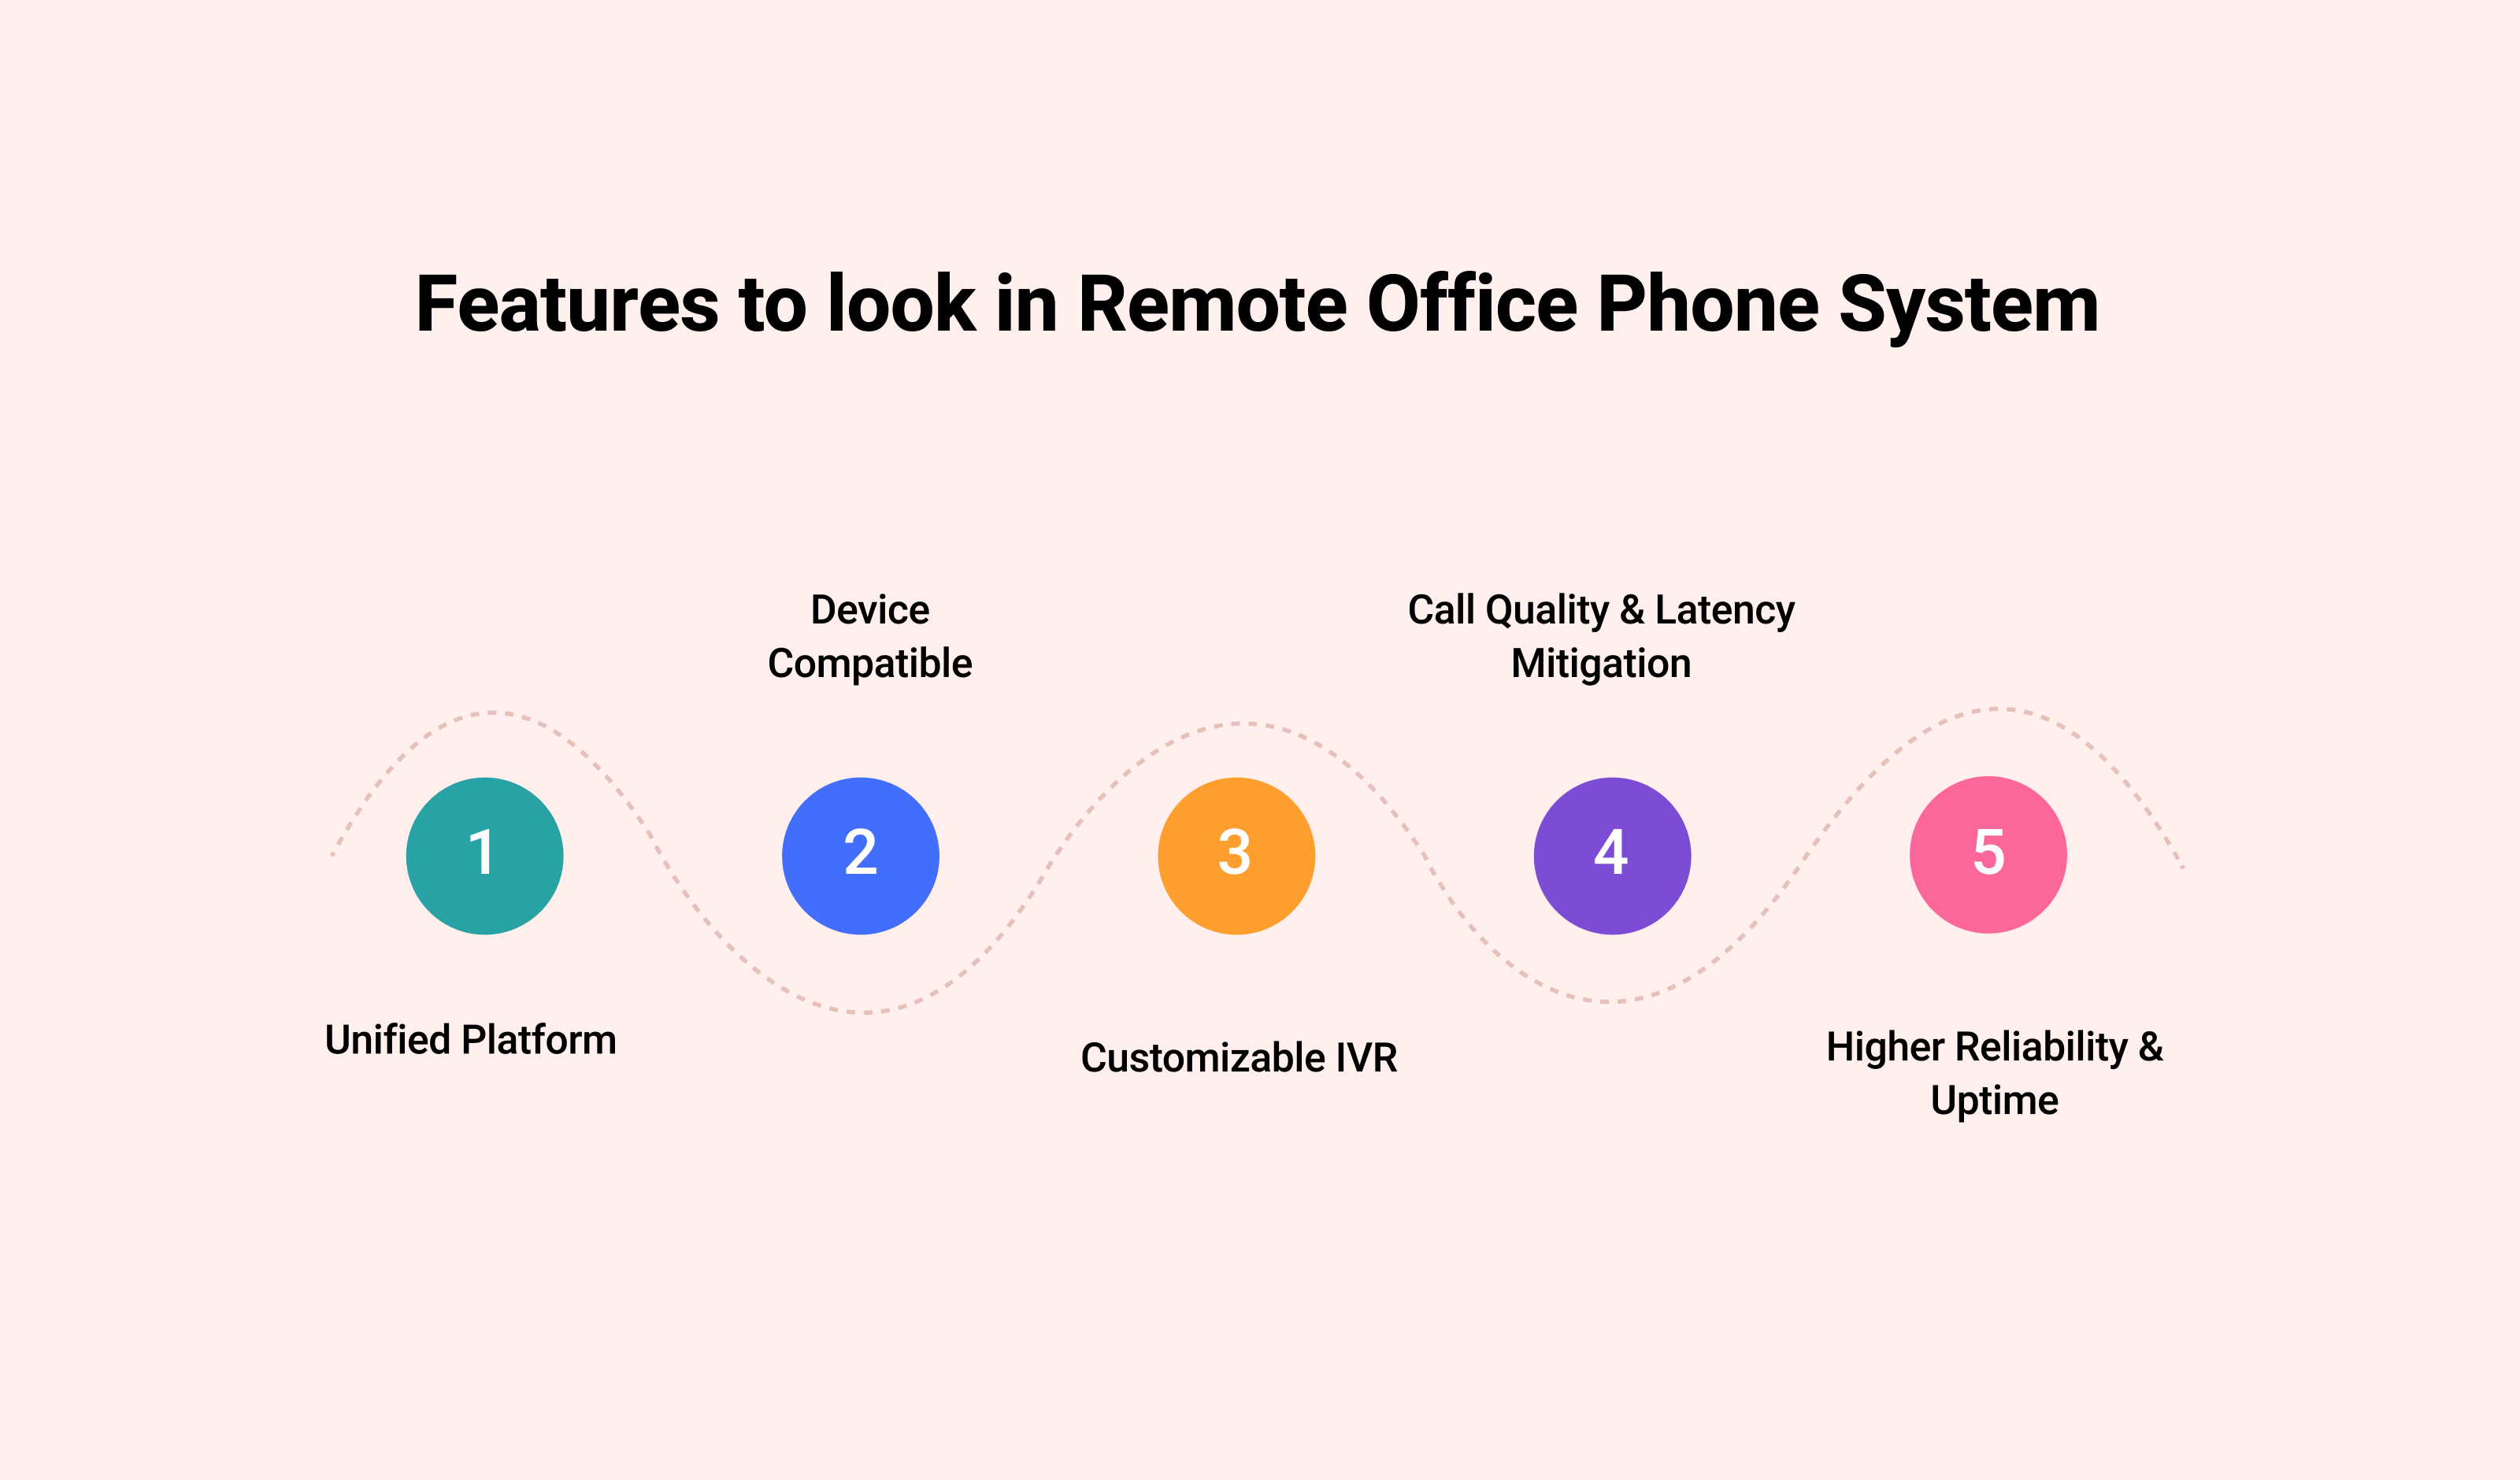 Features to Look in Remote Office Phone System: